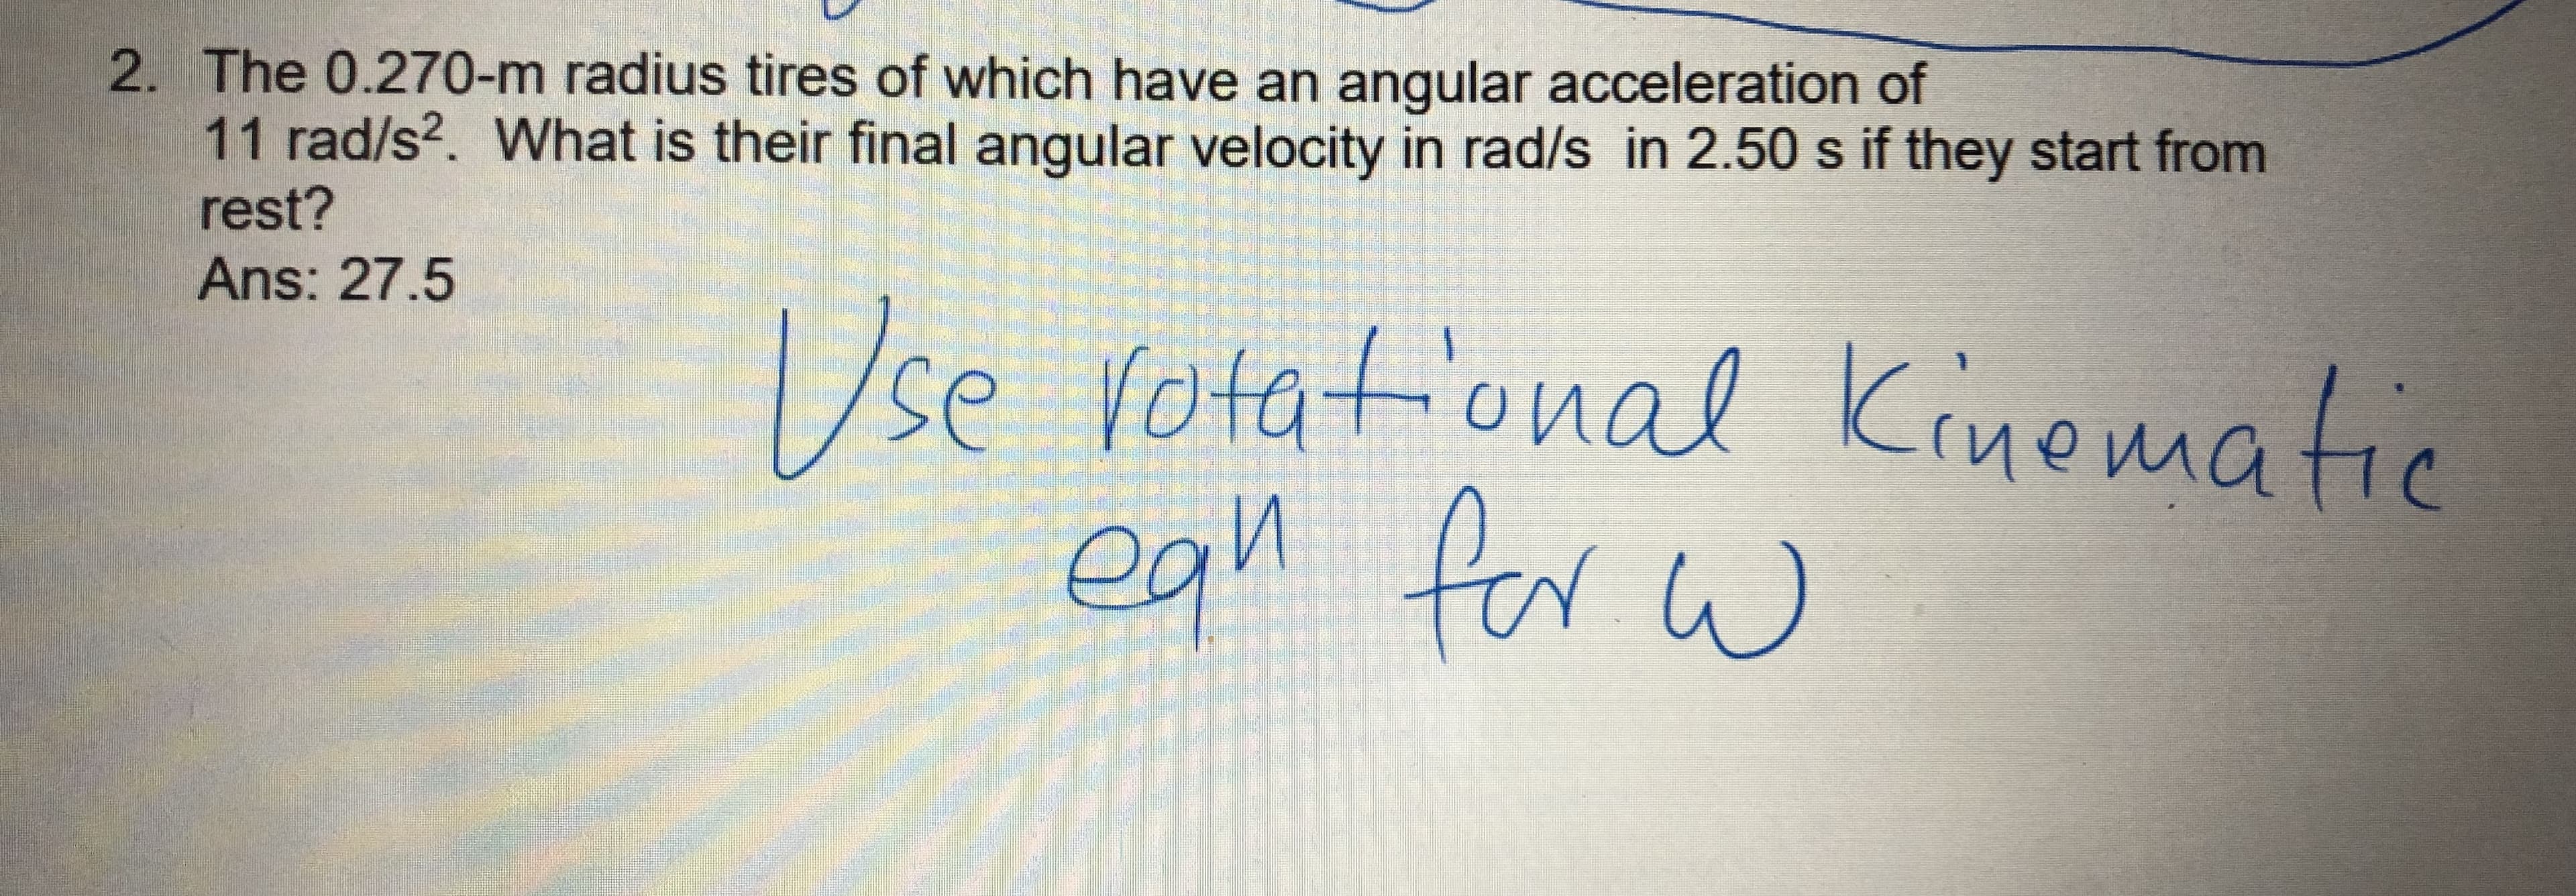 2. The 0.270-m radius tires of which have an angular acceleration of
11 rad/s2. What is their final angular velocity in rad/s in 2.50 s if they start from
rest?
Ans: 27.5
se votat'onal
ean for w
Kinematic
